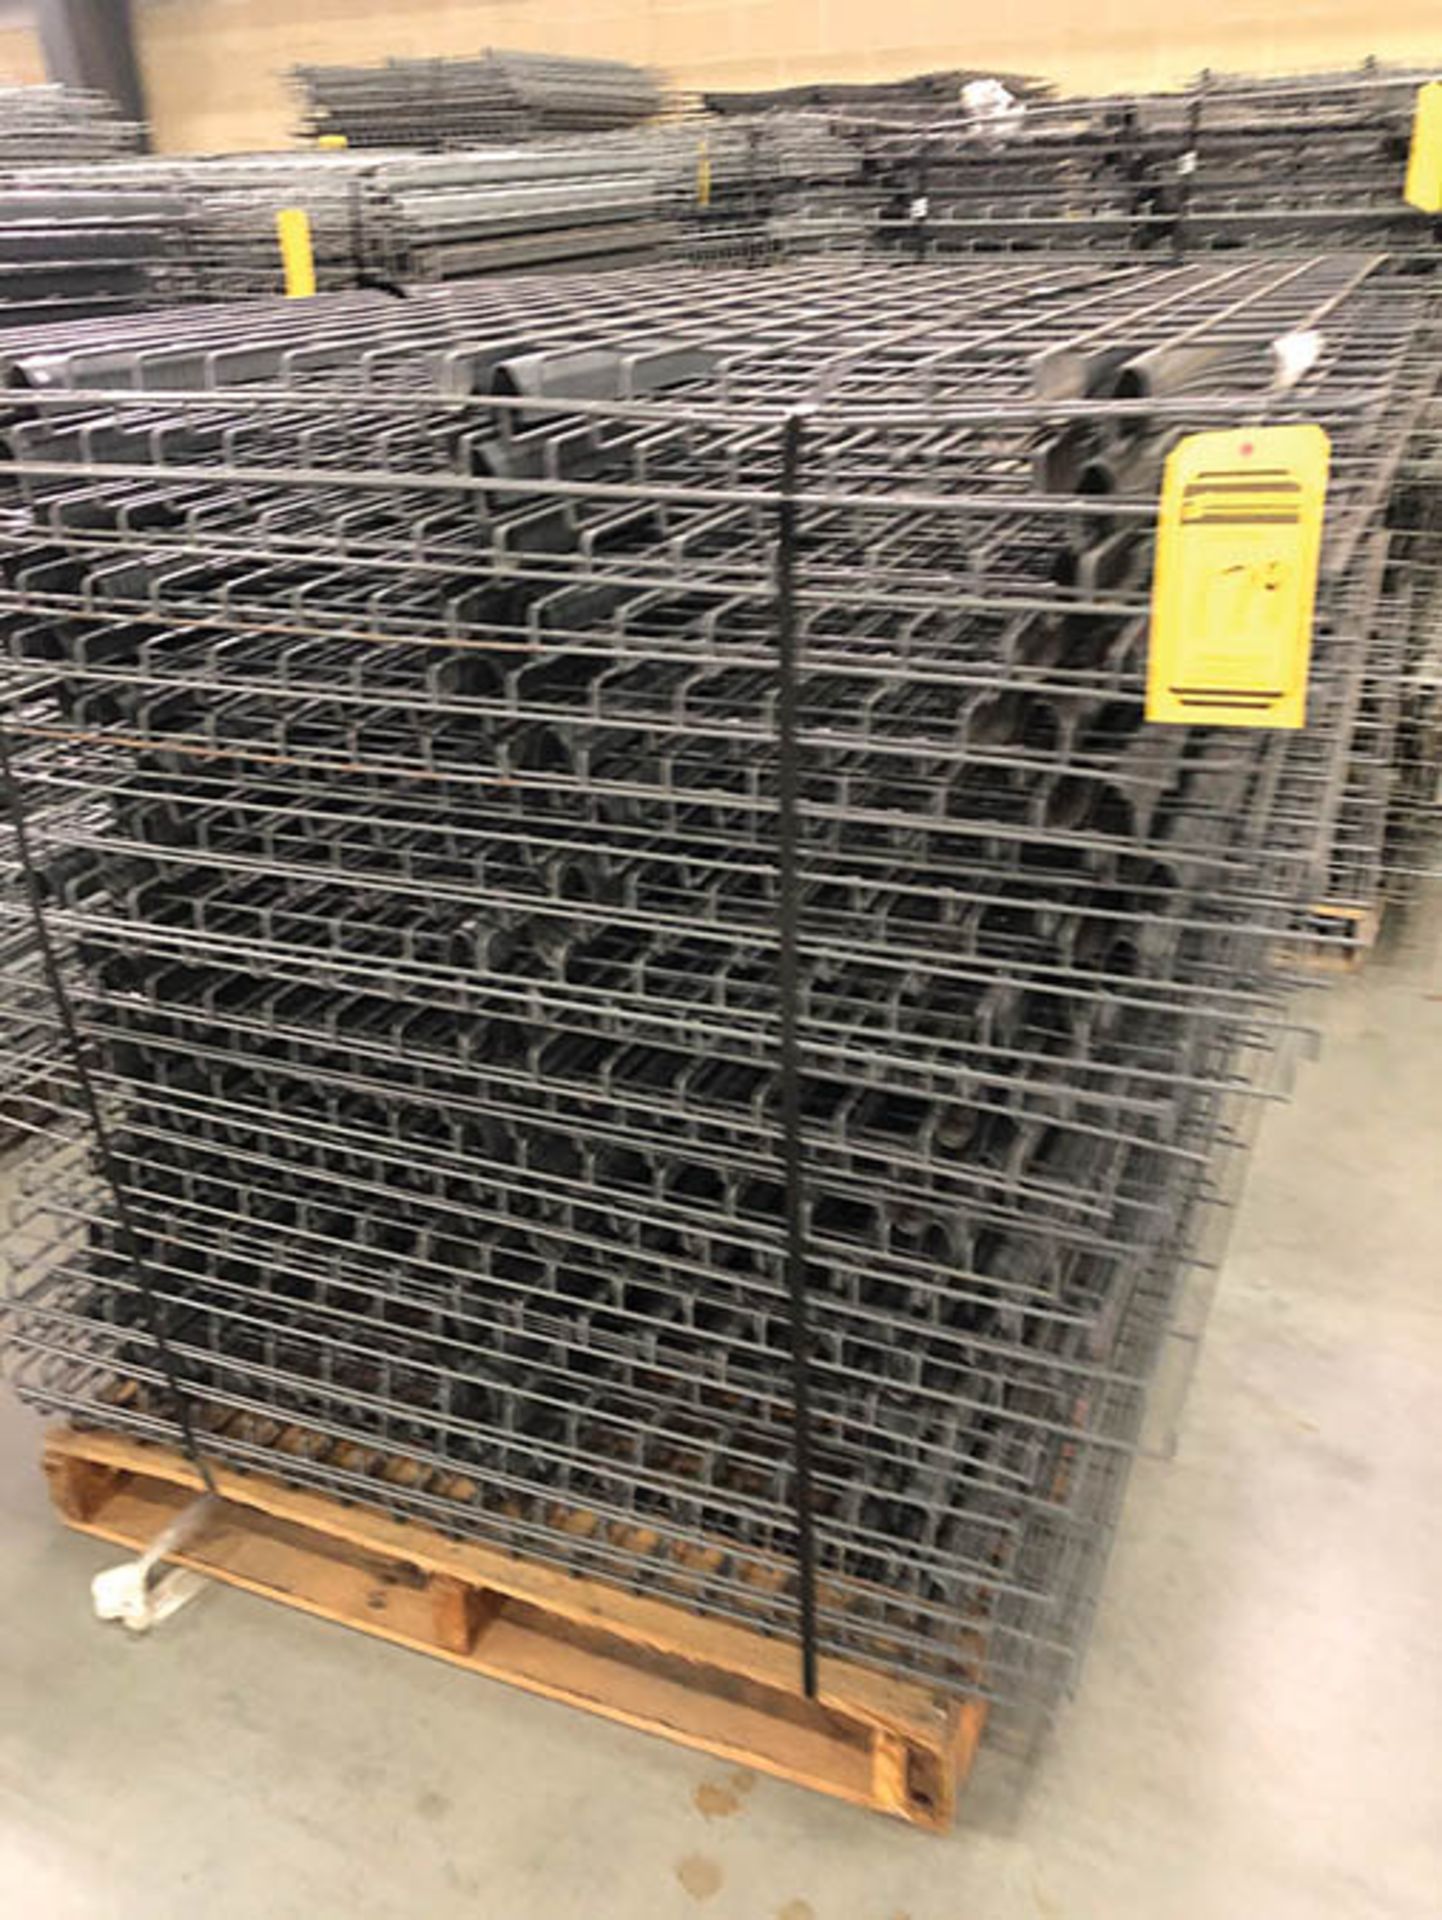 (X189) SECTIONS OF WIRE DECKING 45'` X 44'' X 1'` DEEP